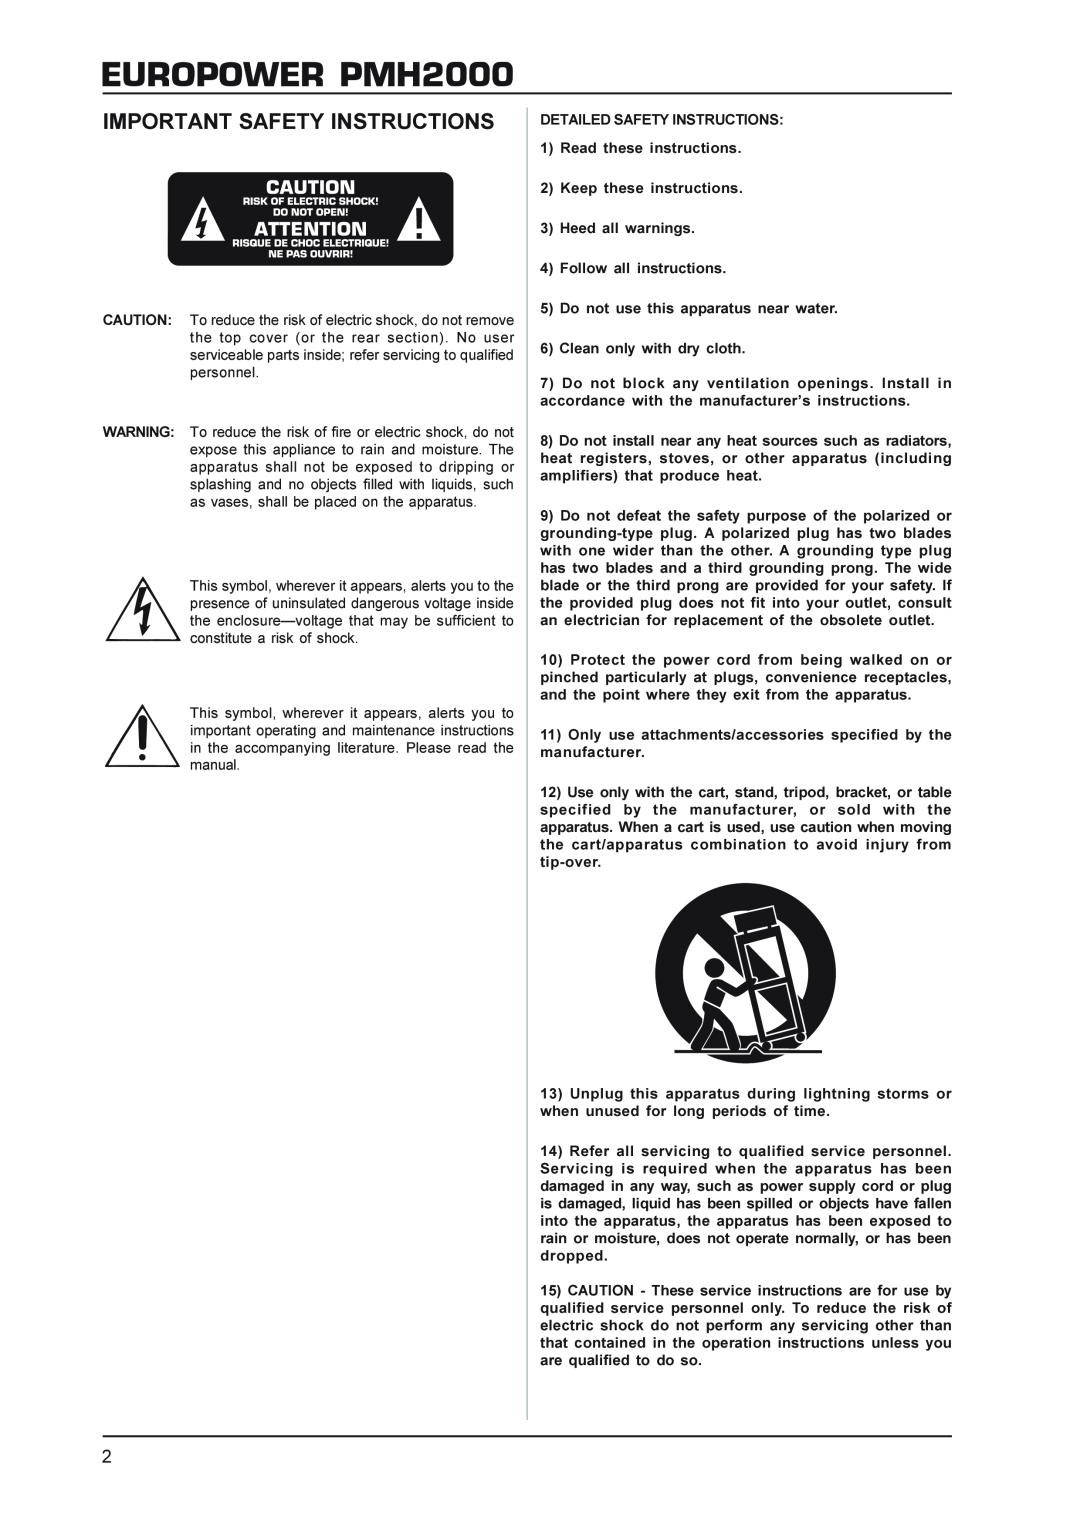 Behringer Power Mixer manual EUROPOWER PMH2000, Important Safety Instructions 